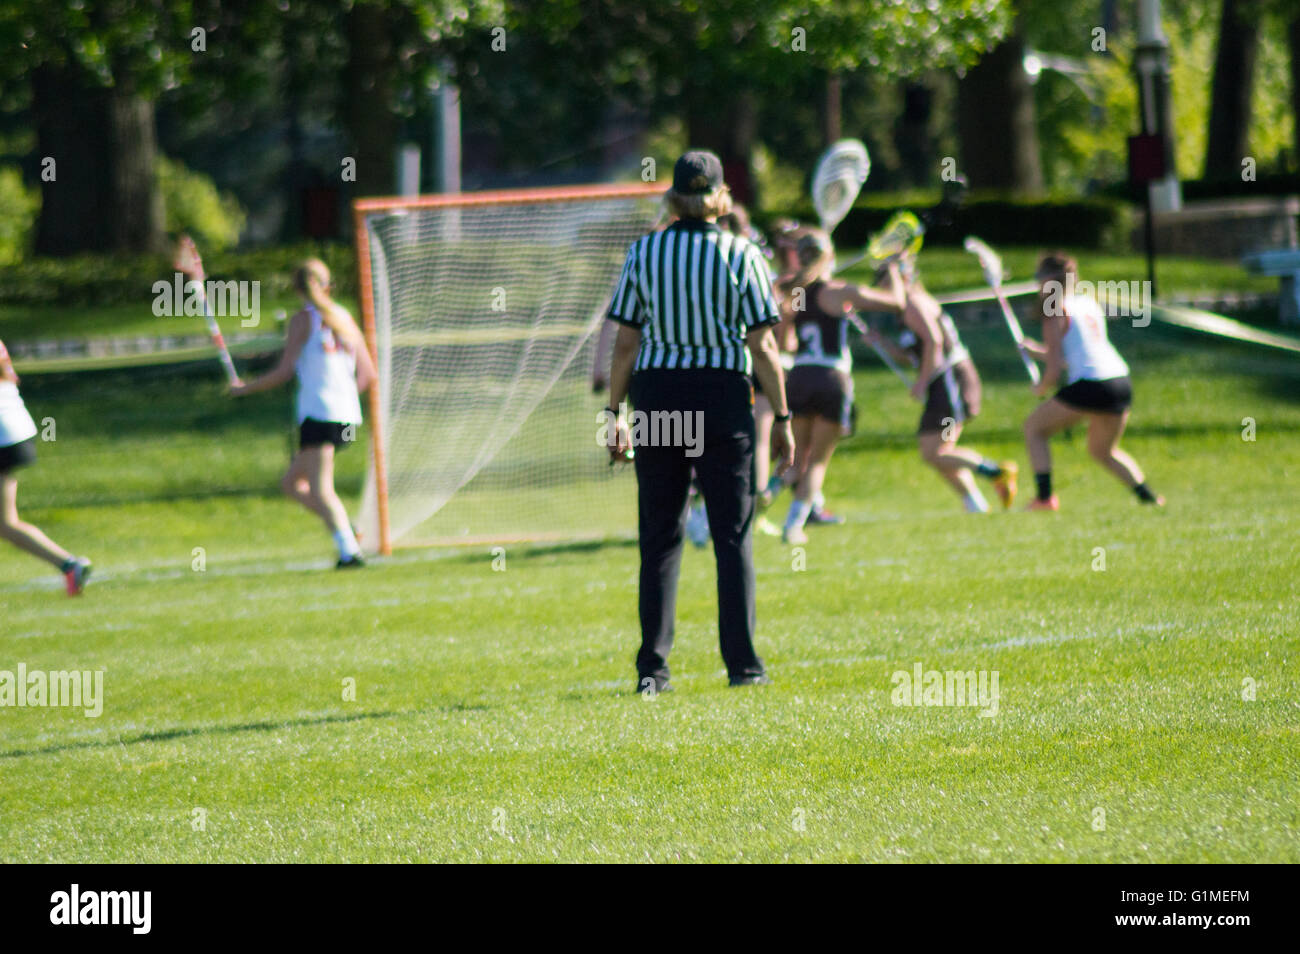 Girls battling at lacrosse on a spring day while the referee stands and watch Stock Photo